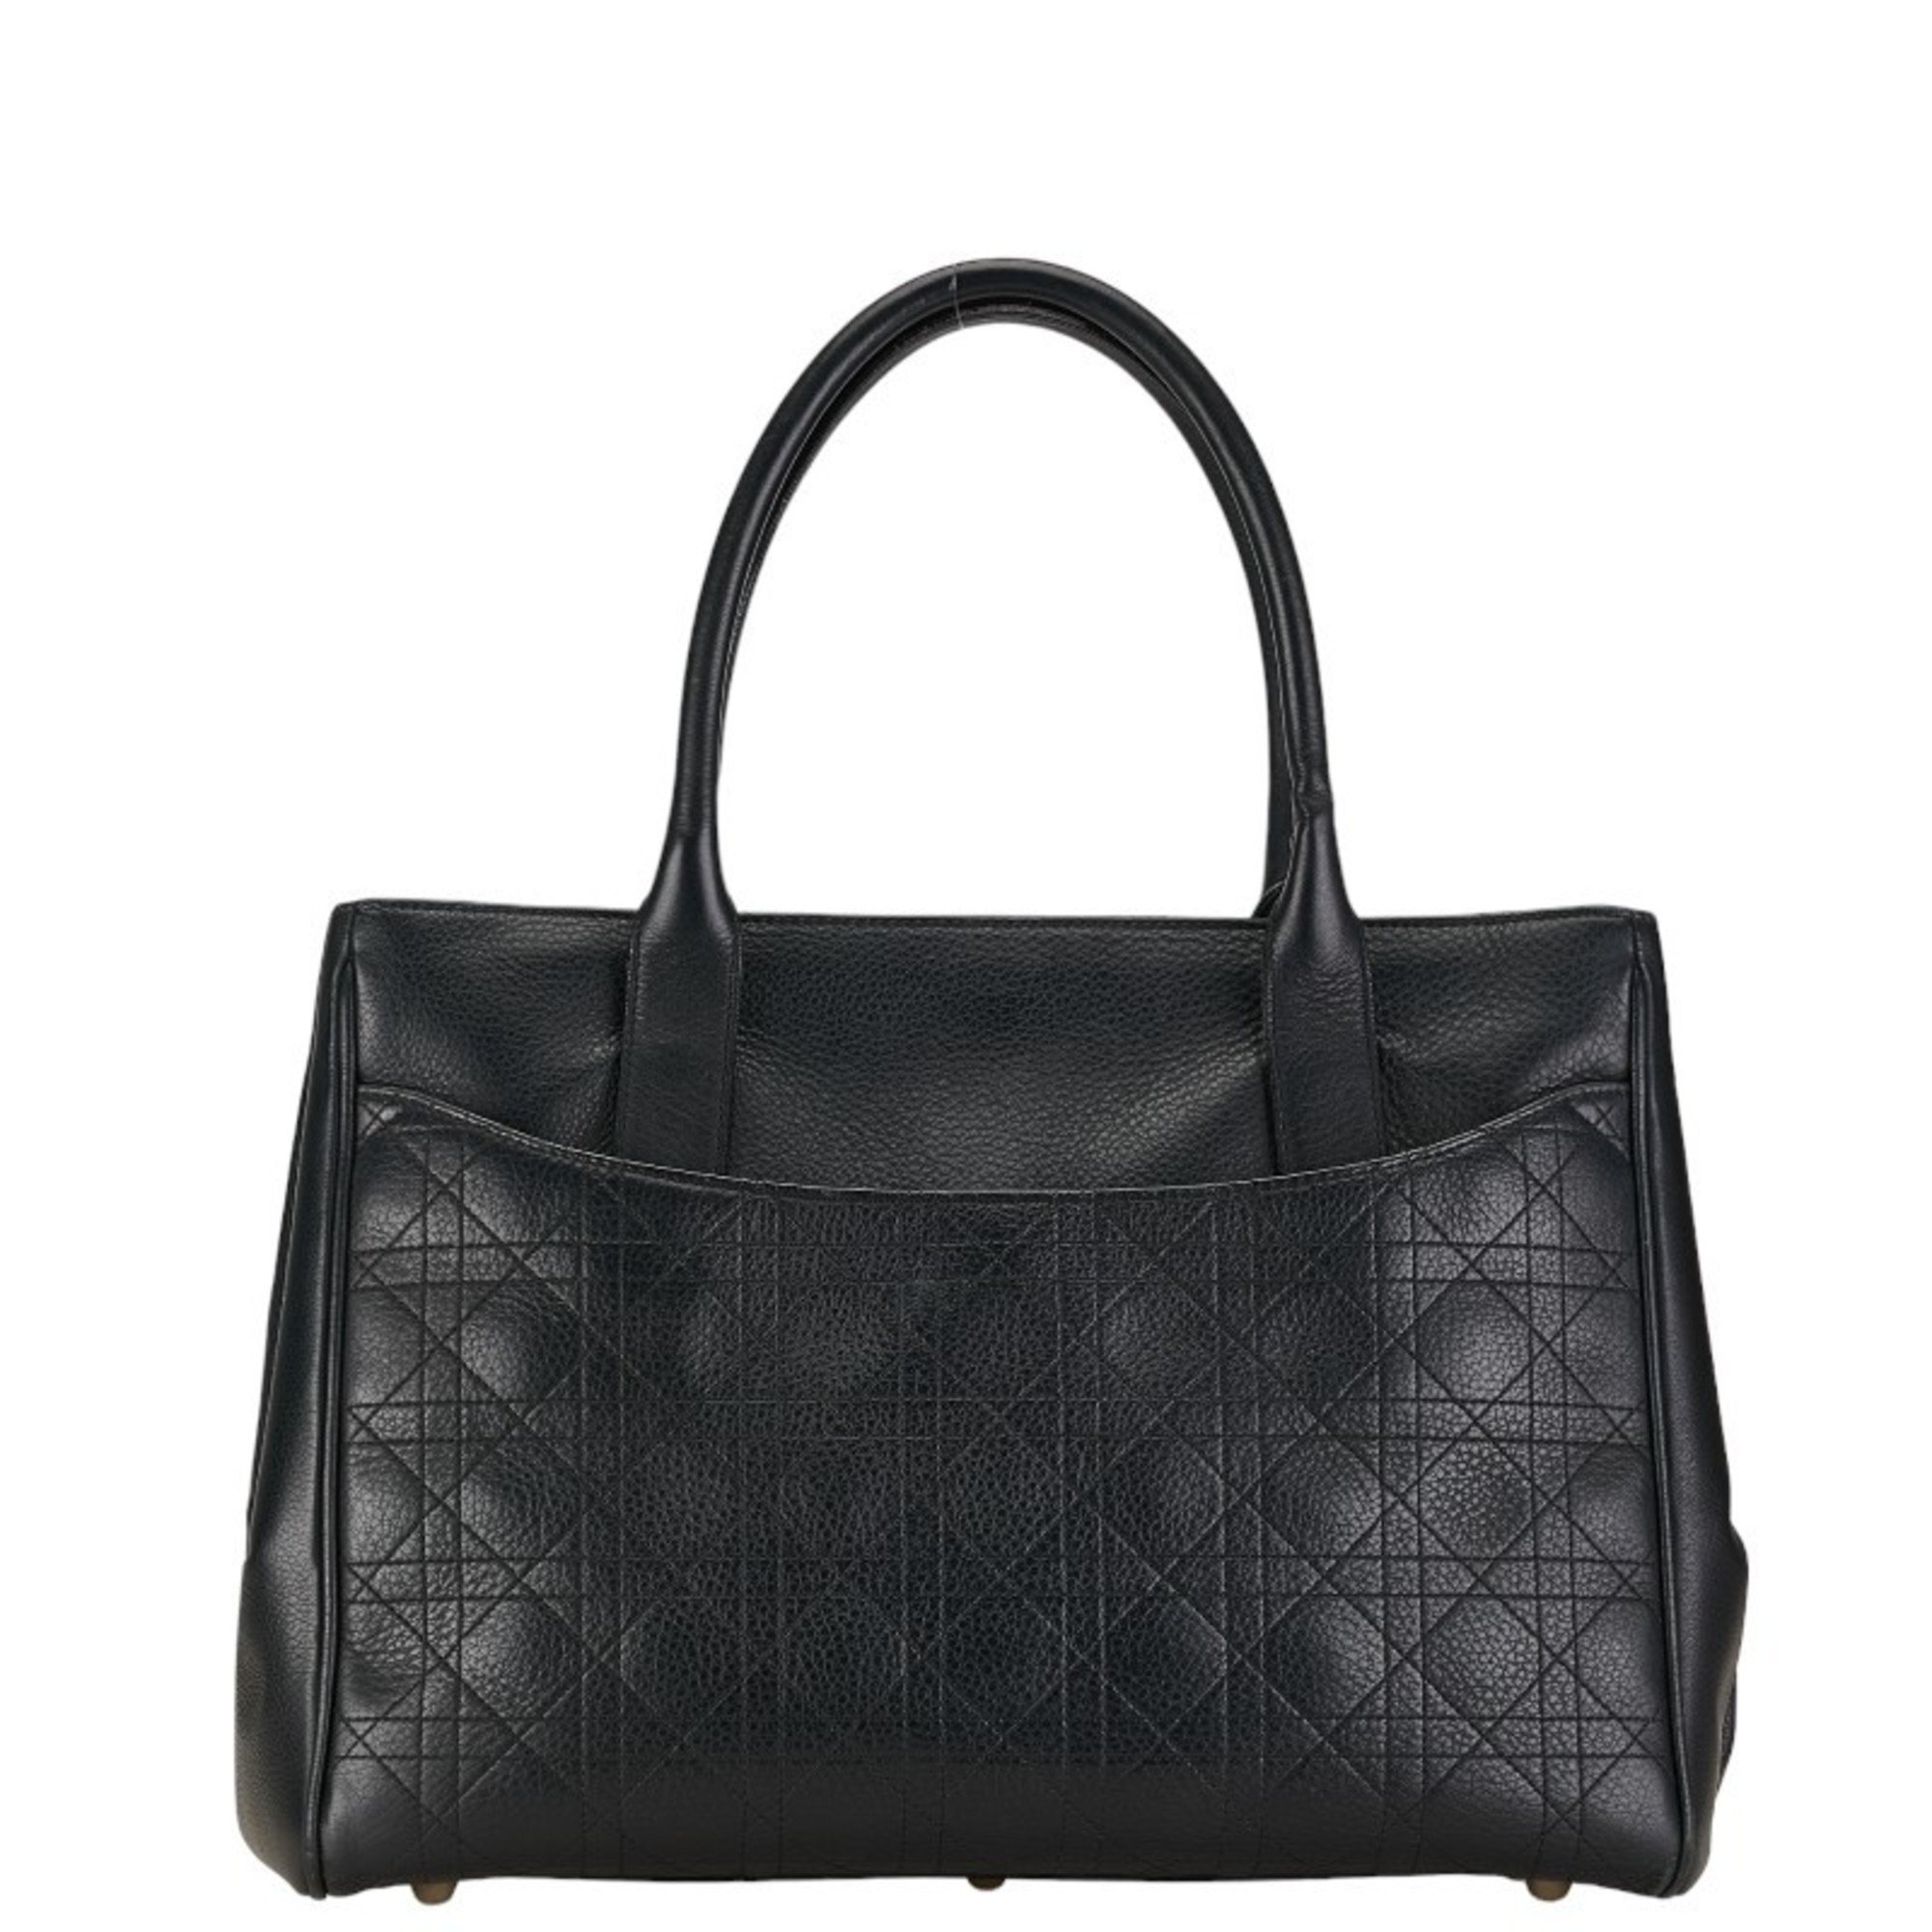 Christian Dior Dior Cannage Tote Bag Black Silver Leather Women's